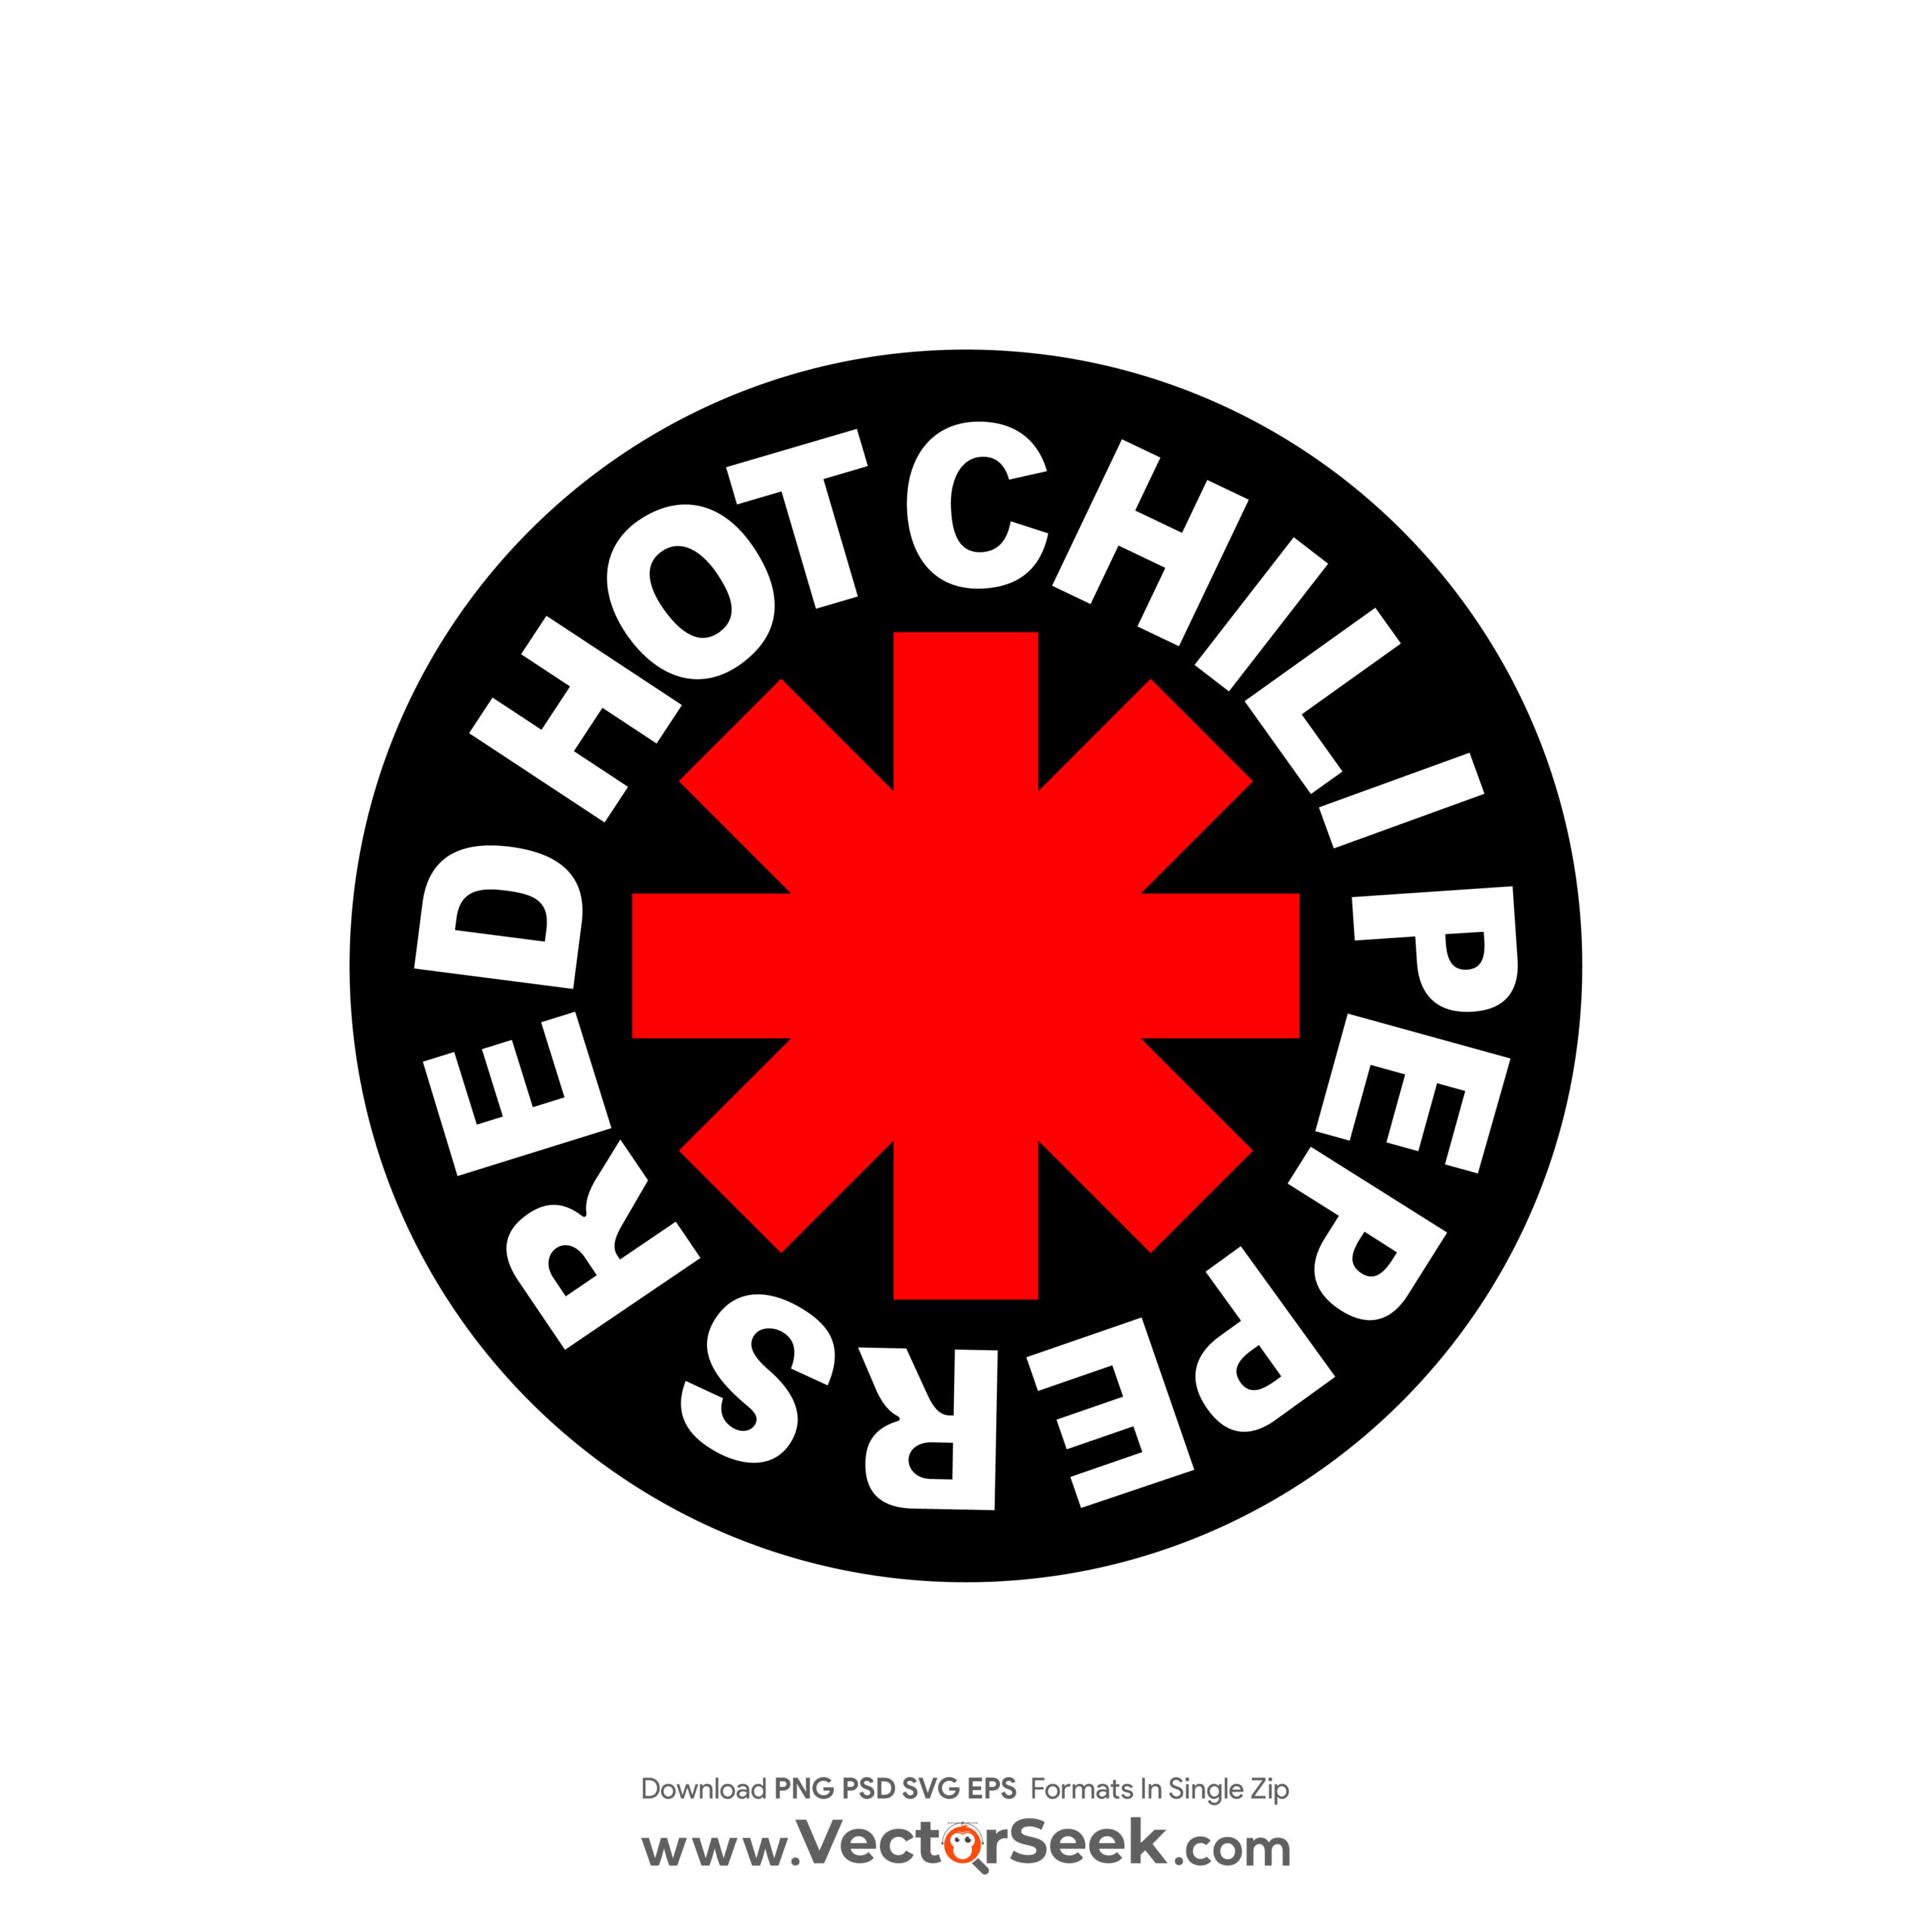 lotus malt Den aktuelle Red Hot Chili Peppers Logo Vector - (.Ai .PNG .SVG .EPS Free Download)